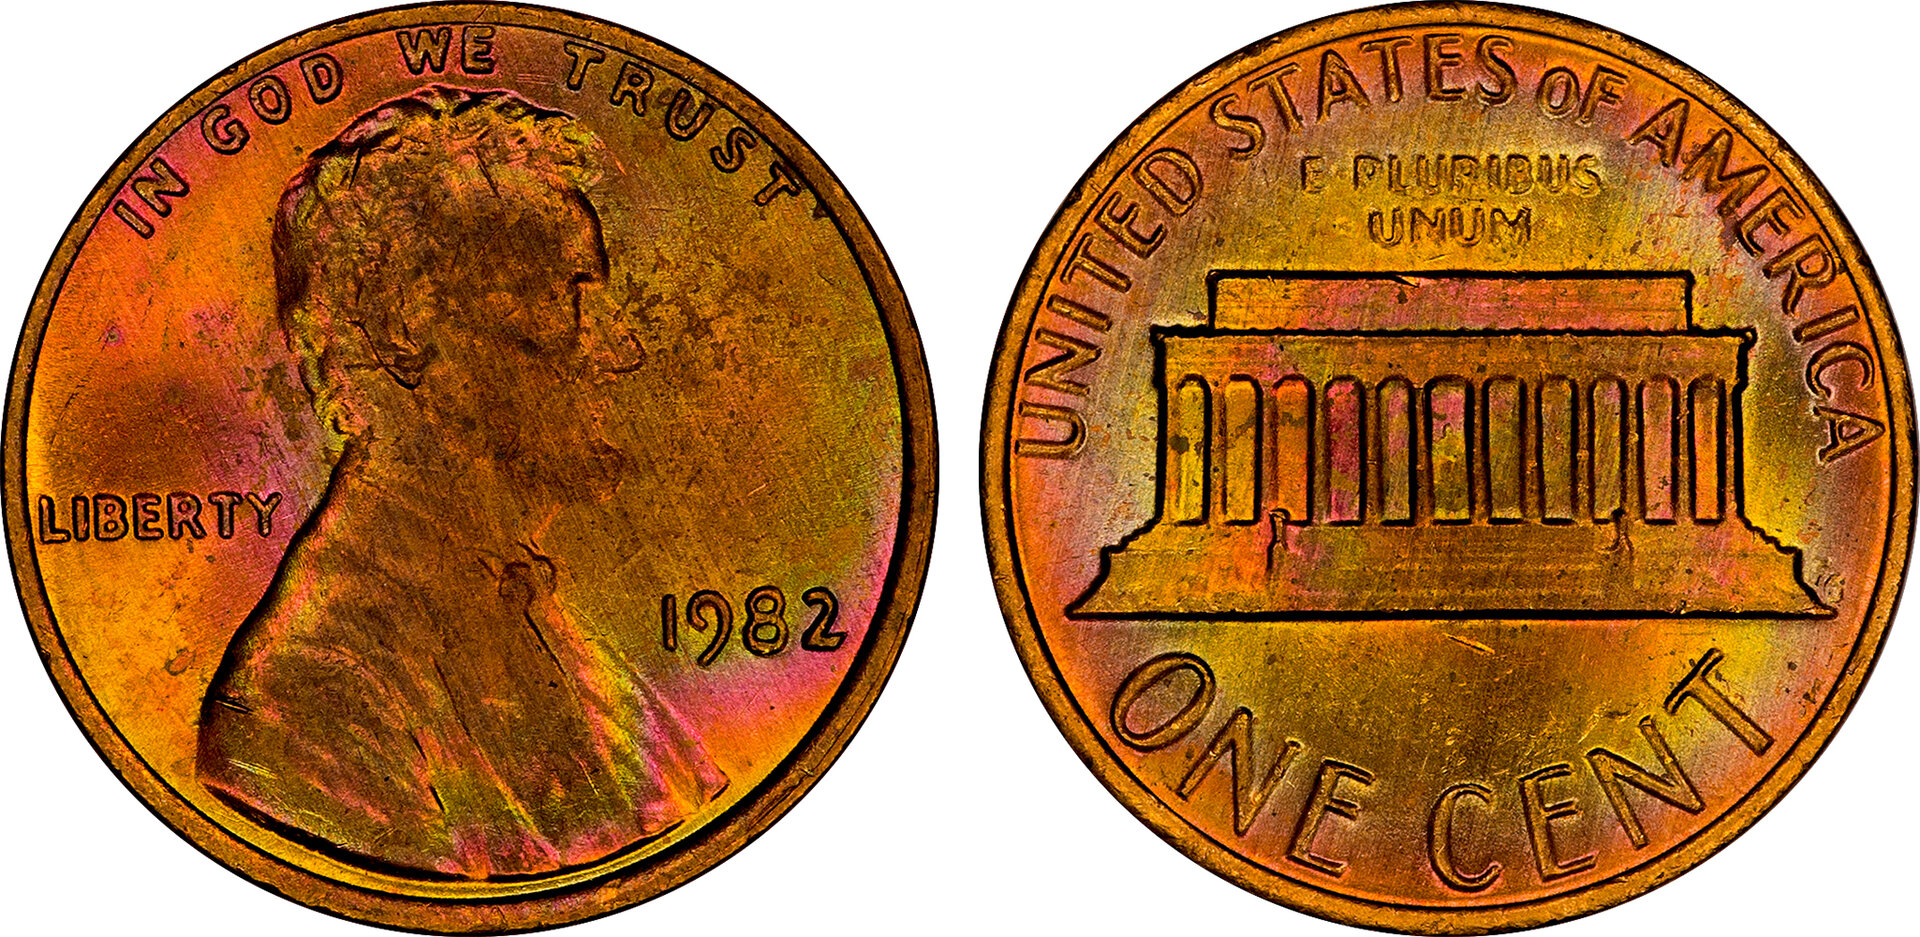 1982 (Large Date Copper) Lincoln Cent.jpg